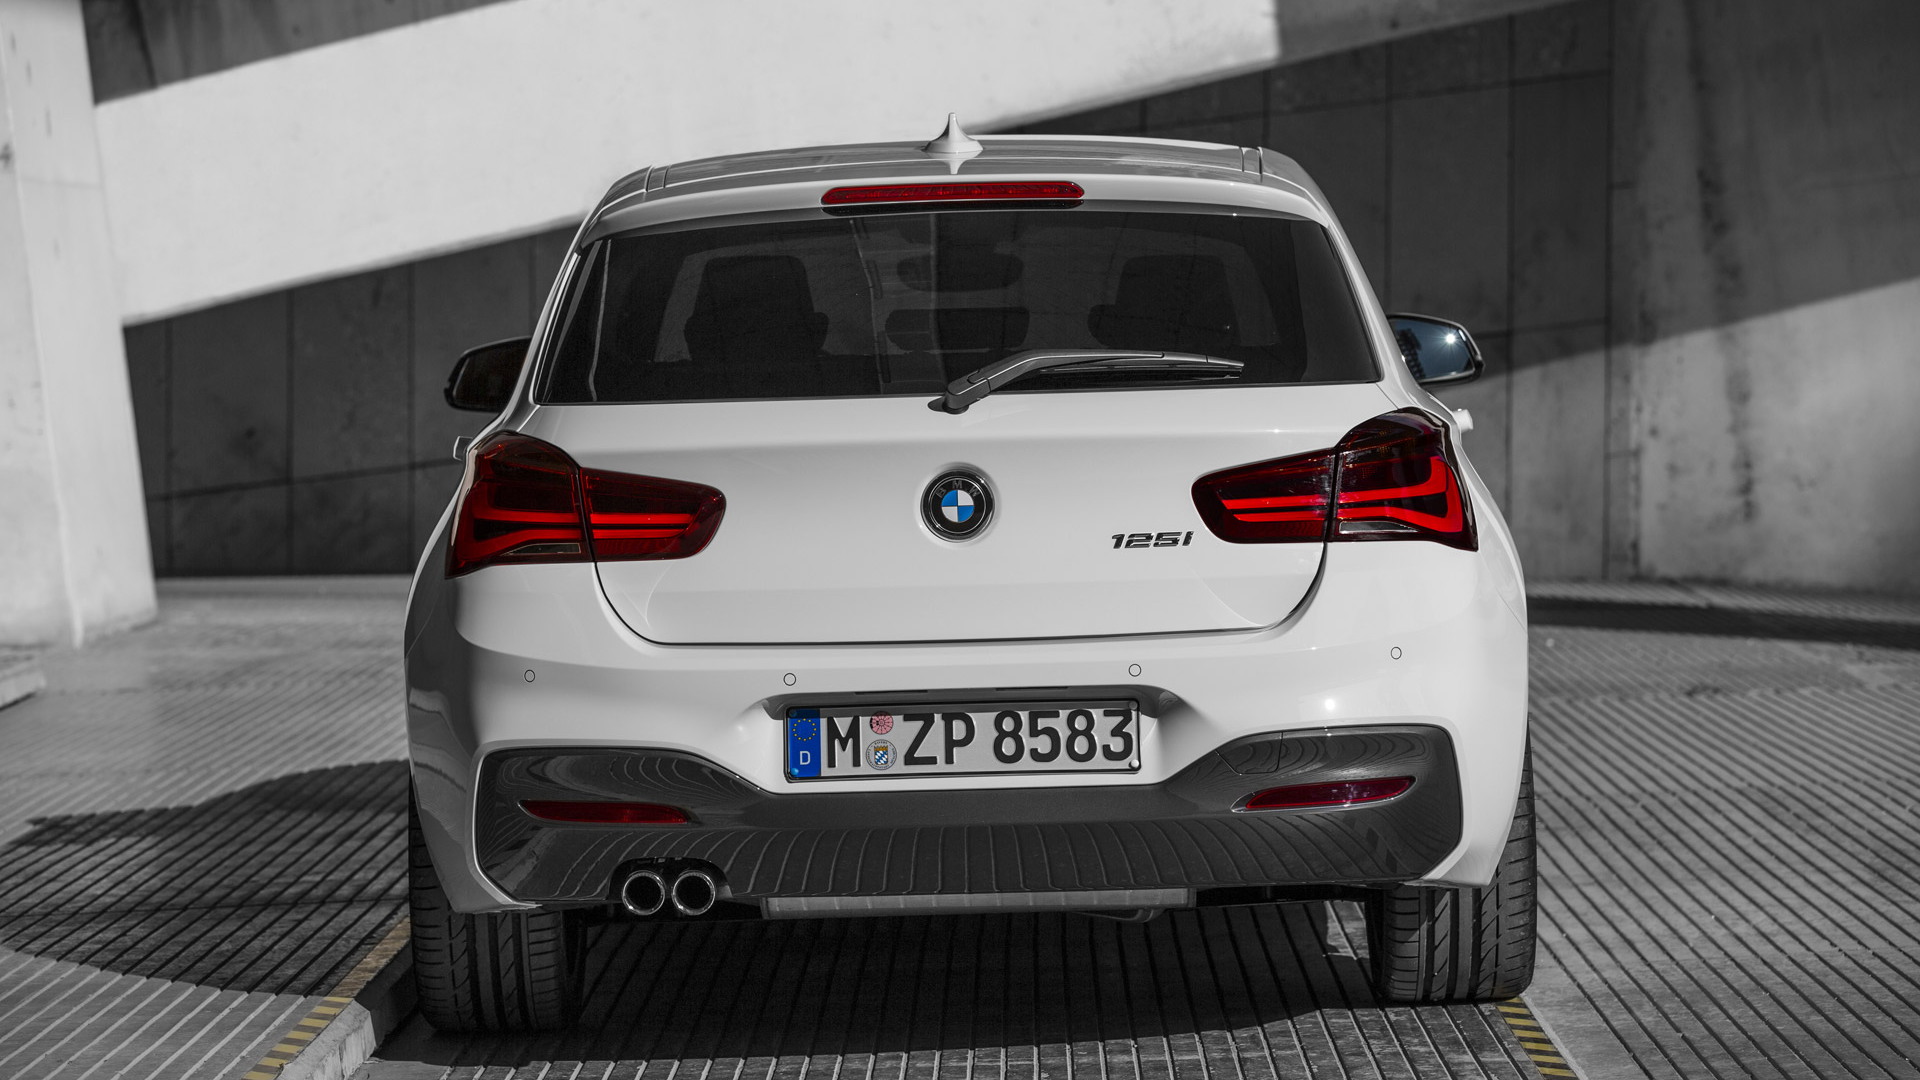 2015 BMW 1-Series Hatchback equipped with M Sport package